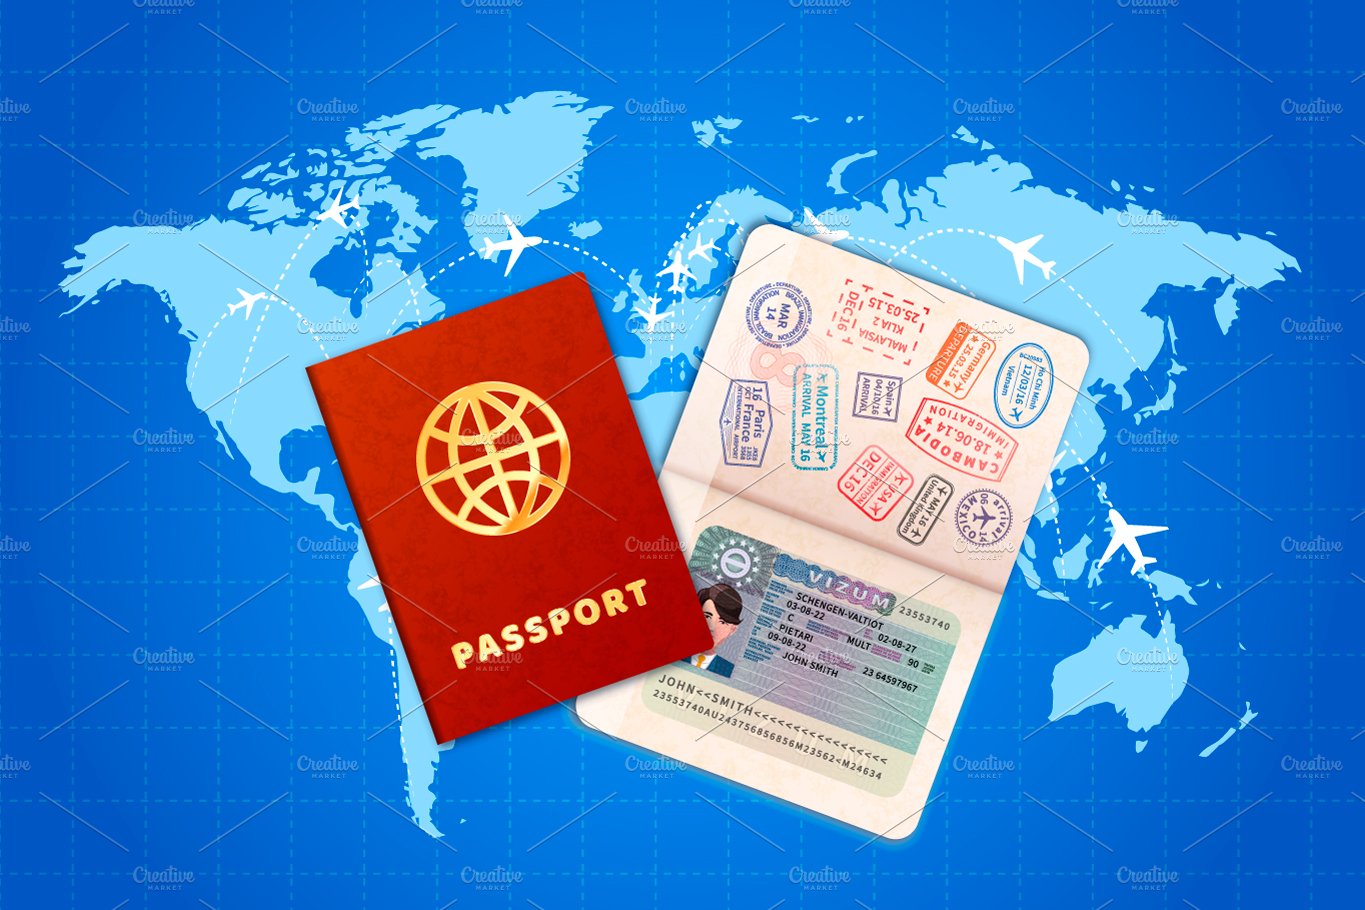 Couple passports with UE visa cover image.